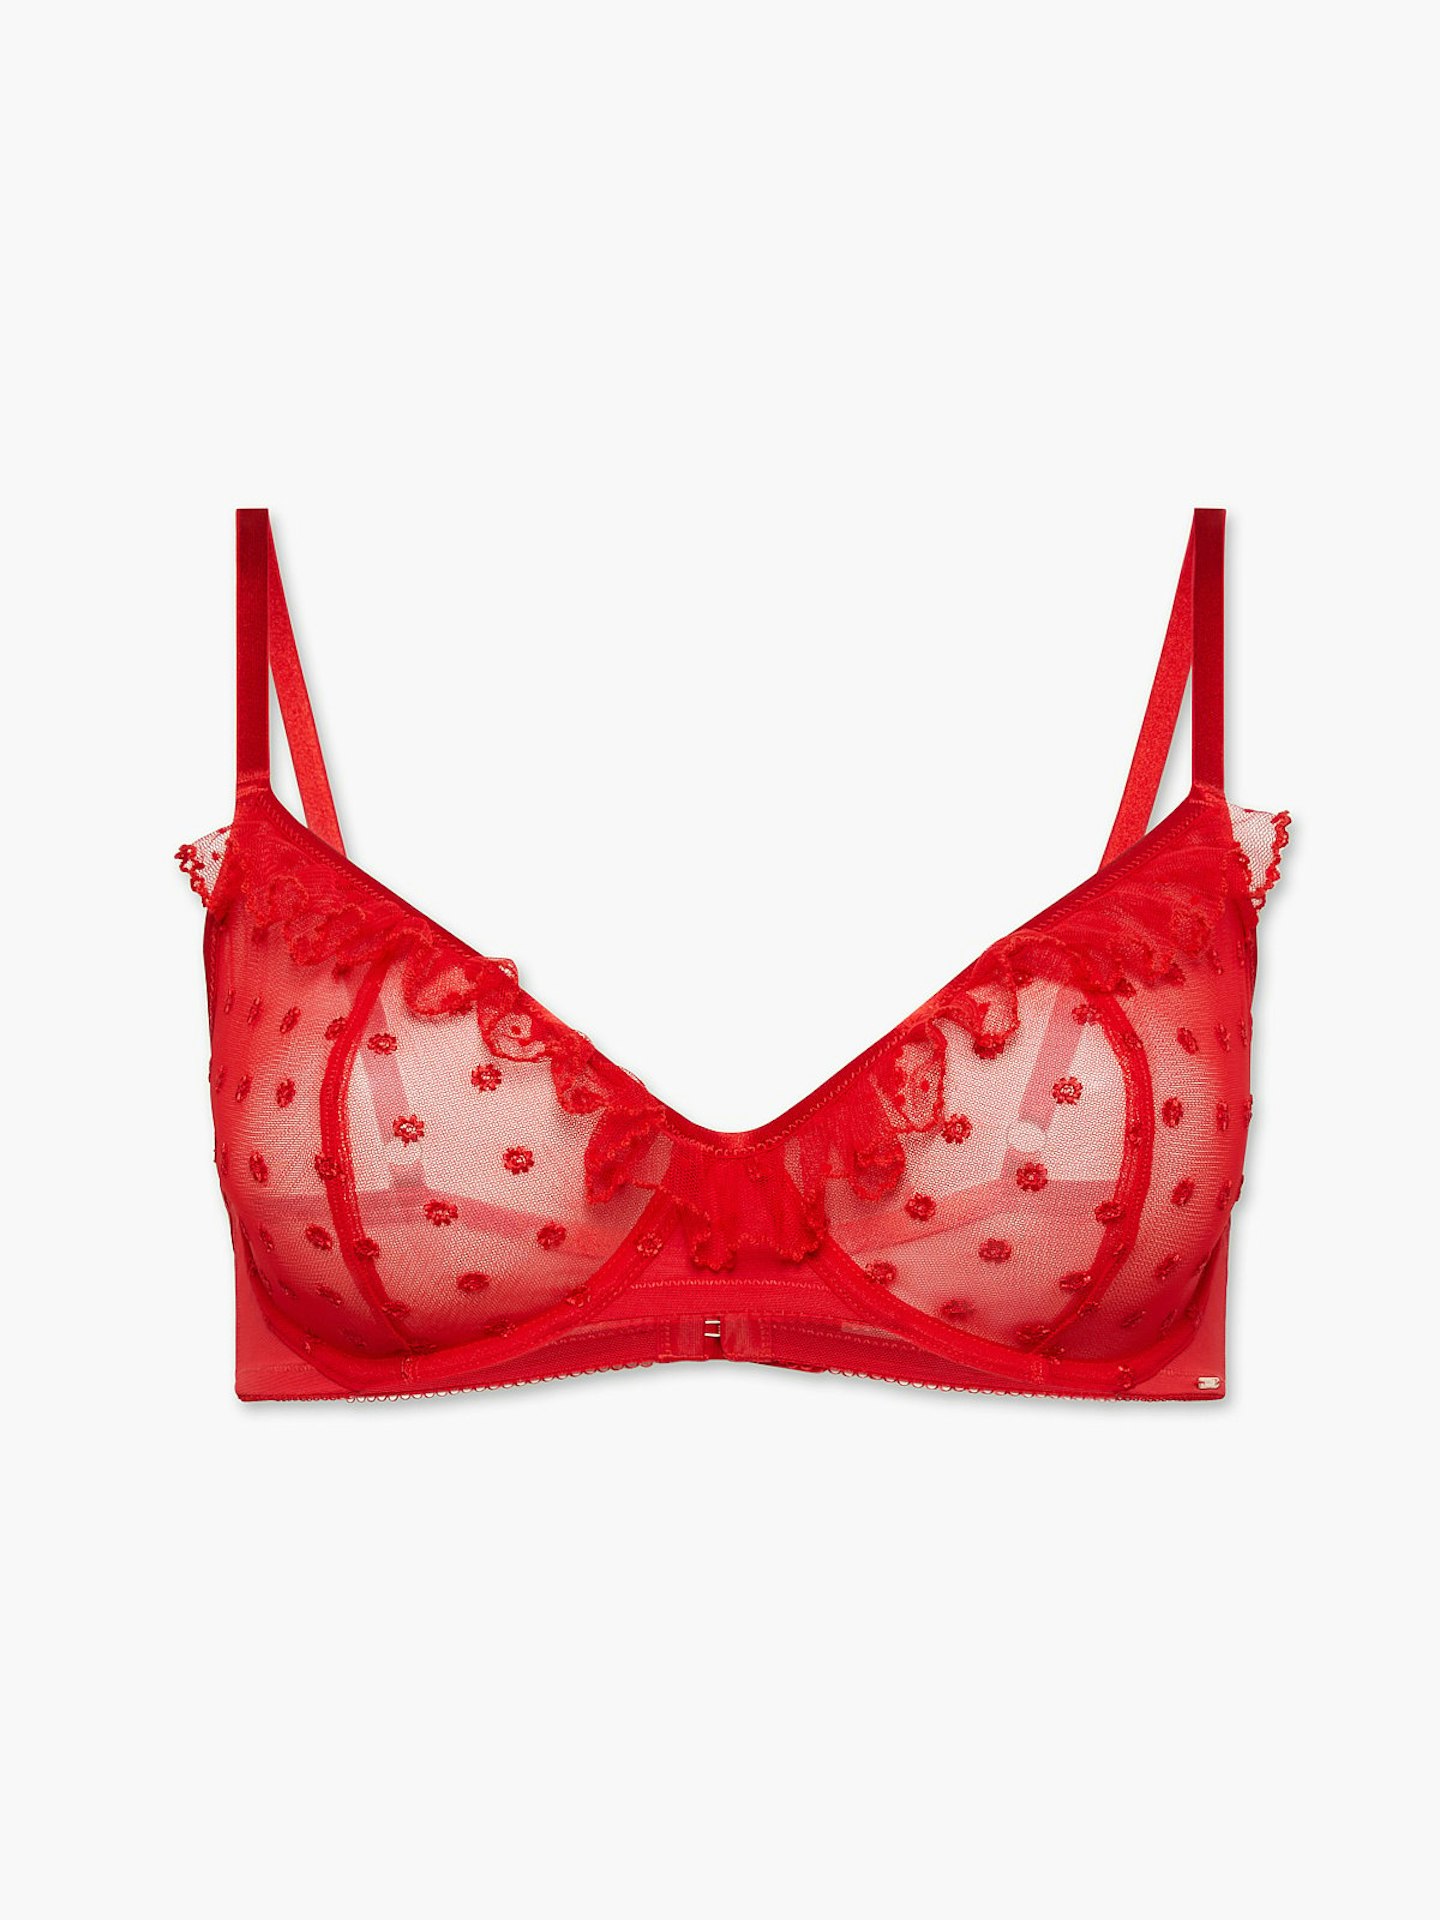 The 20 Must-Have Lingerie Brands of 2020 - Lithium Magazine